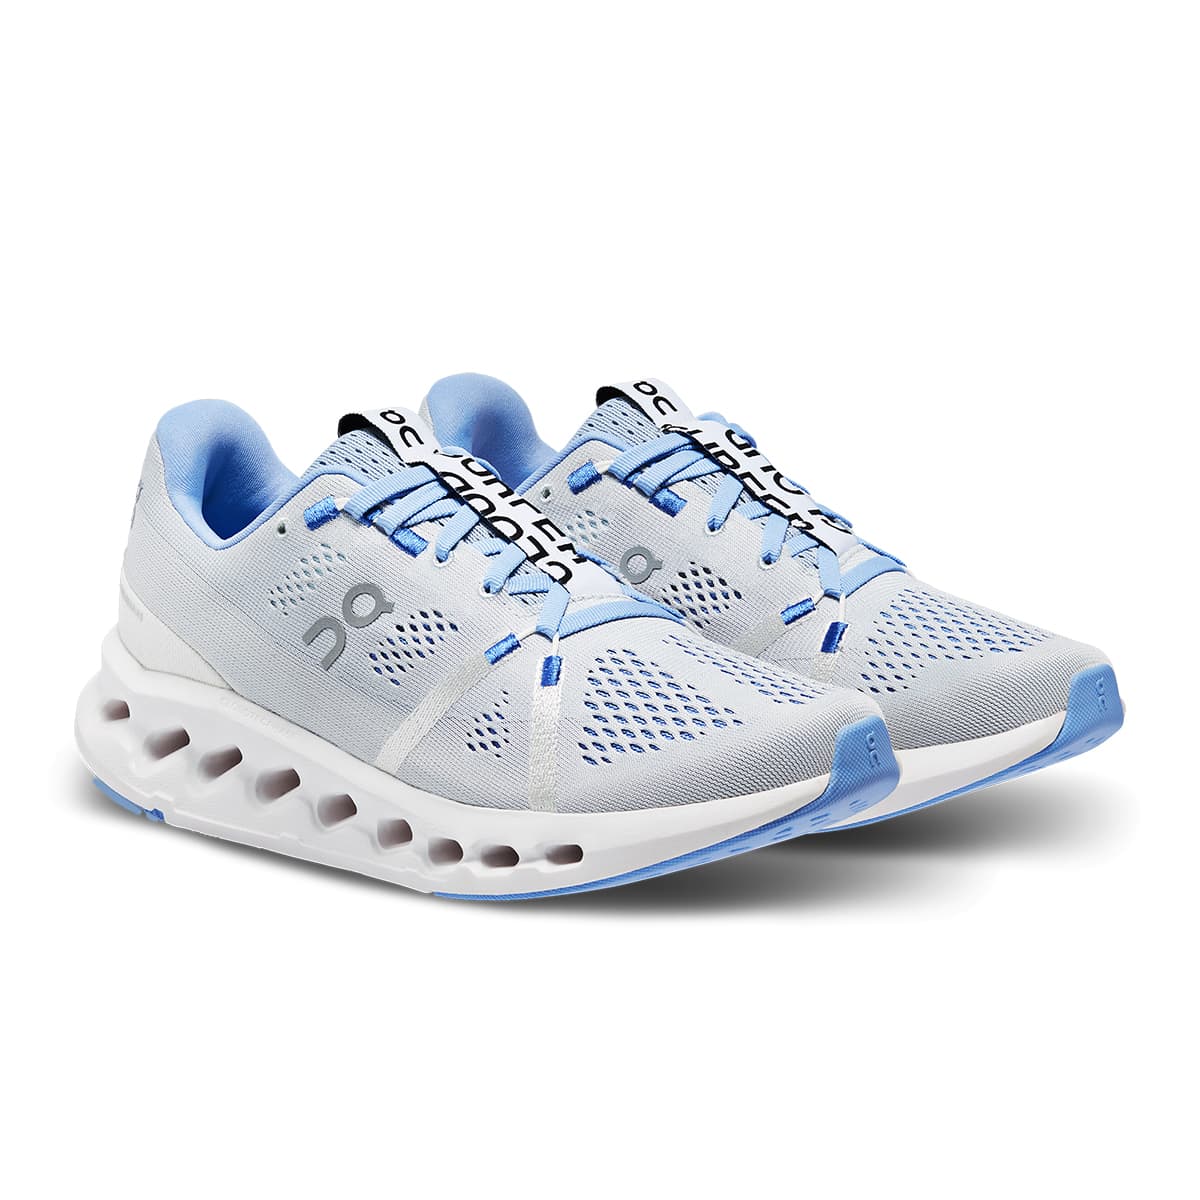 On's new Cloudsurfer performance running shoe now in SA – Tifosi